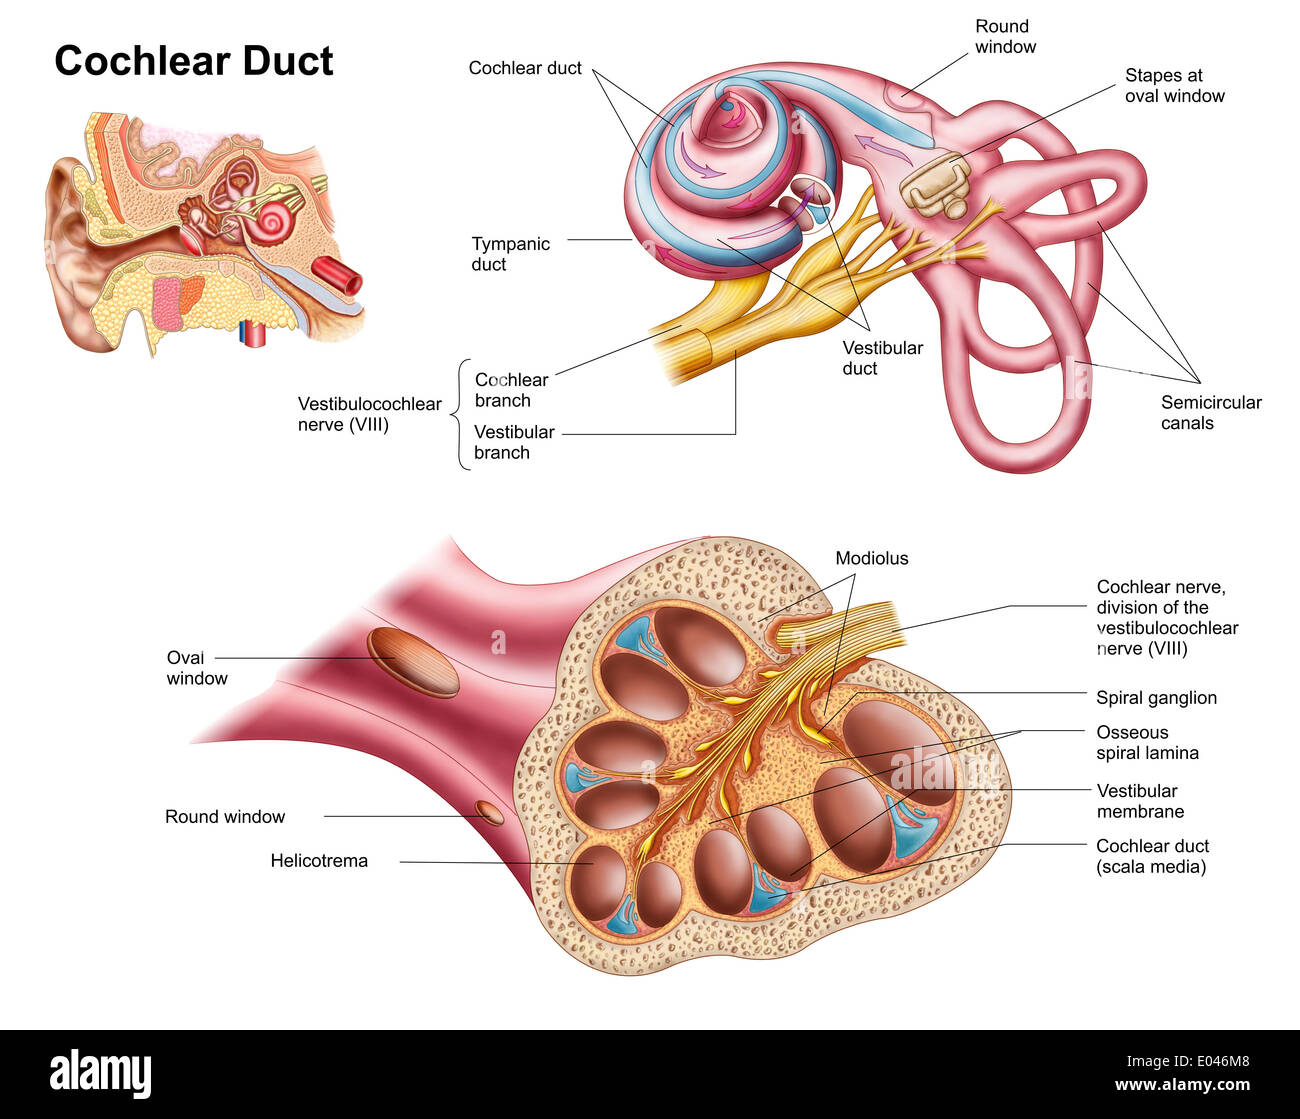 Anatomy of the cochlear duct in the human ear. Stock Photo